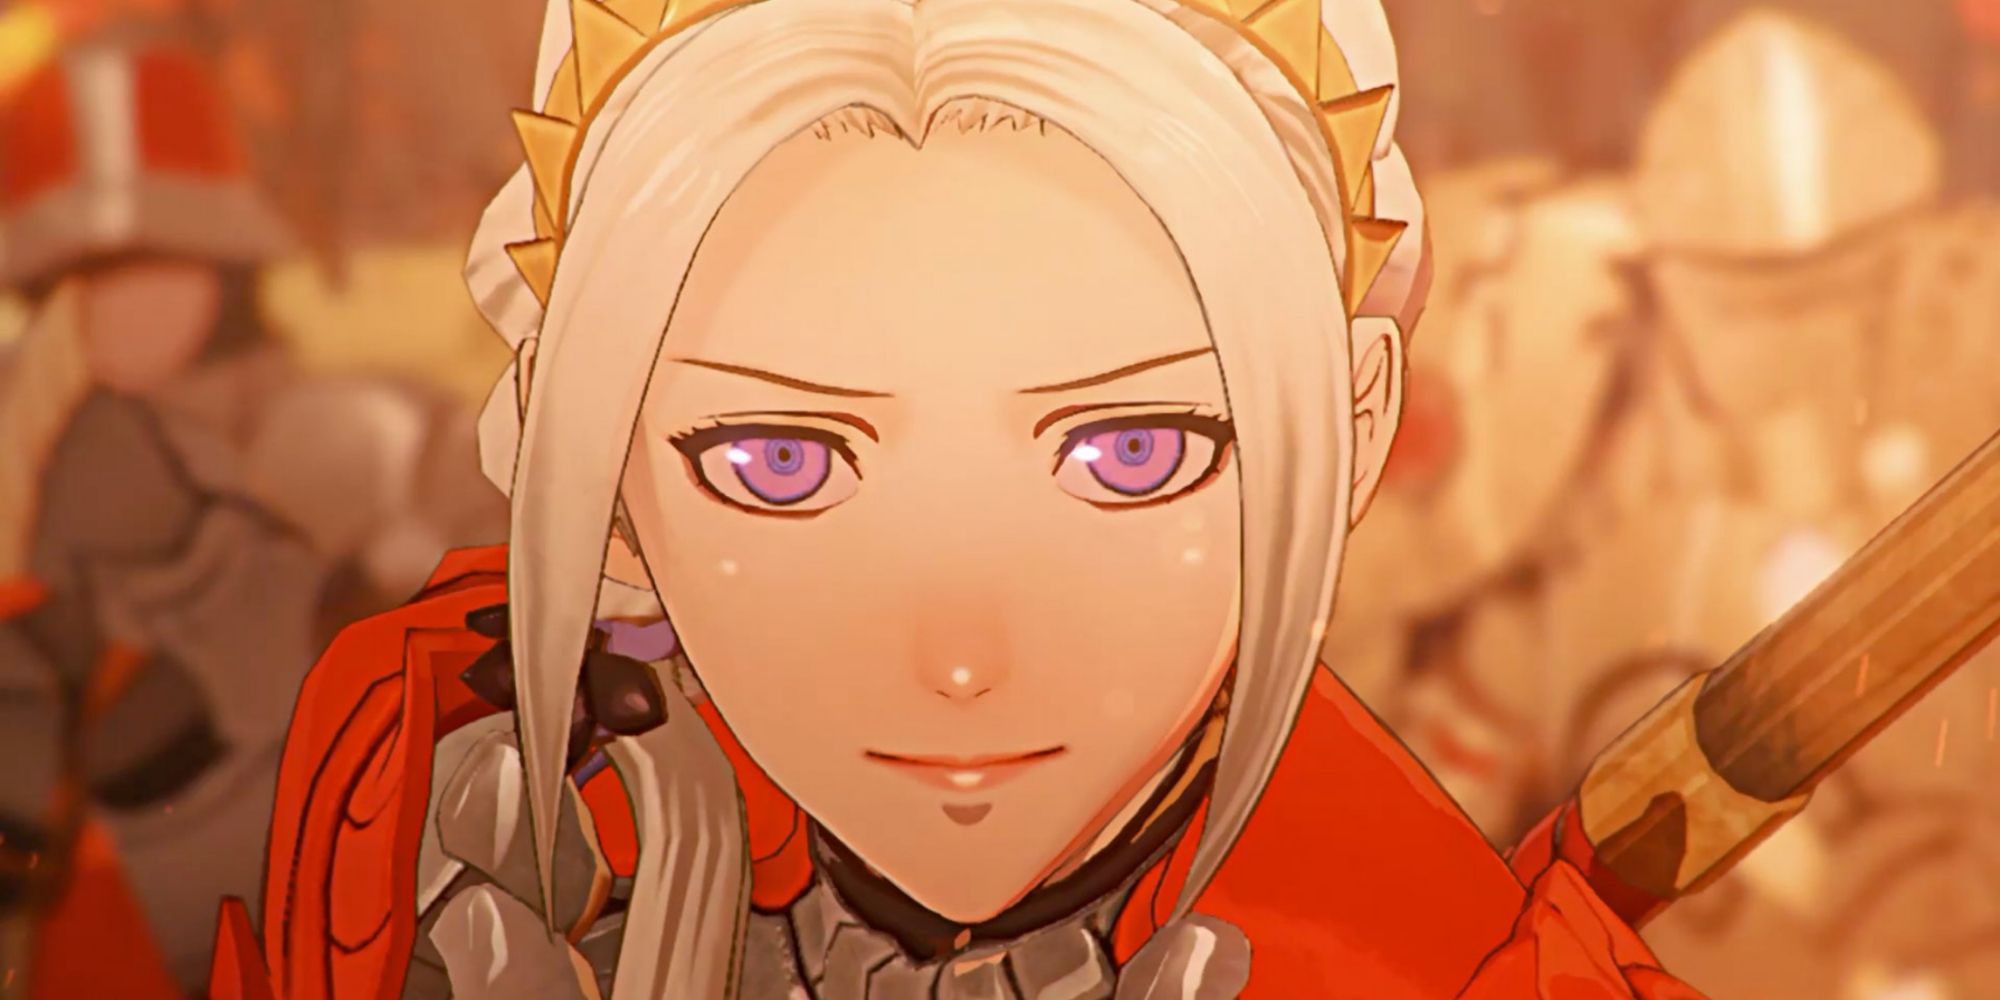 Edelgard stands at the ready with soldiers behind her